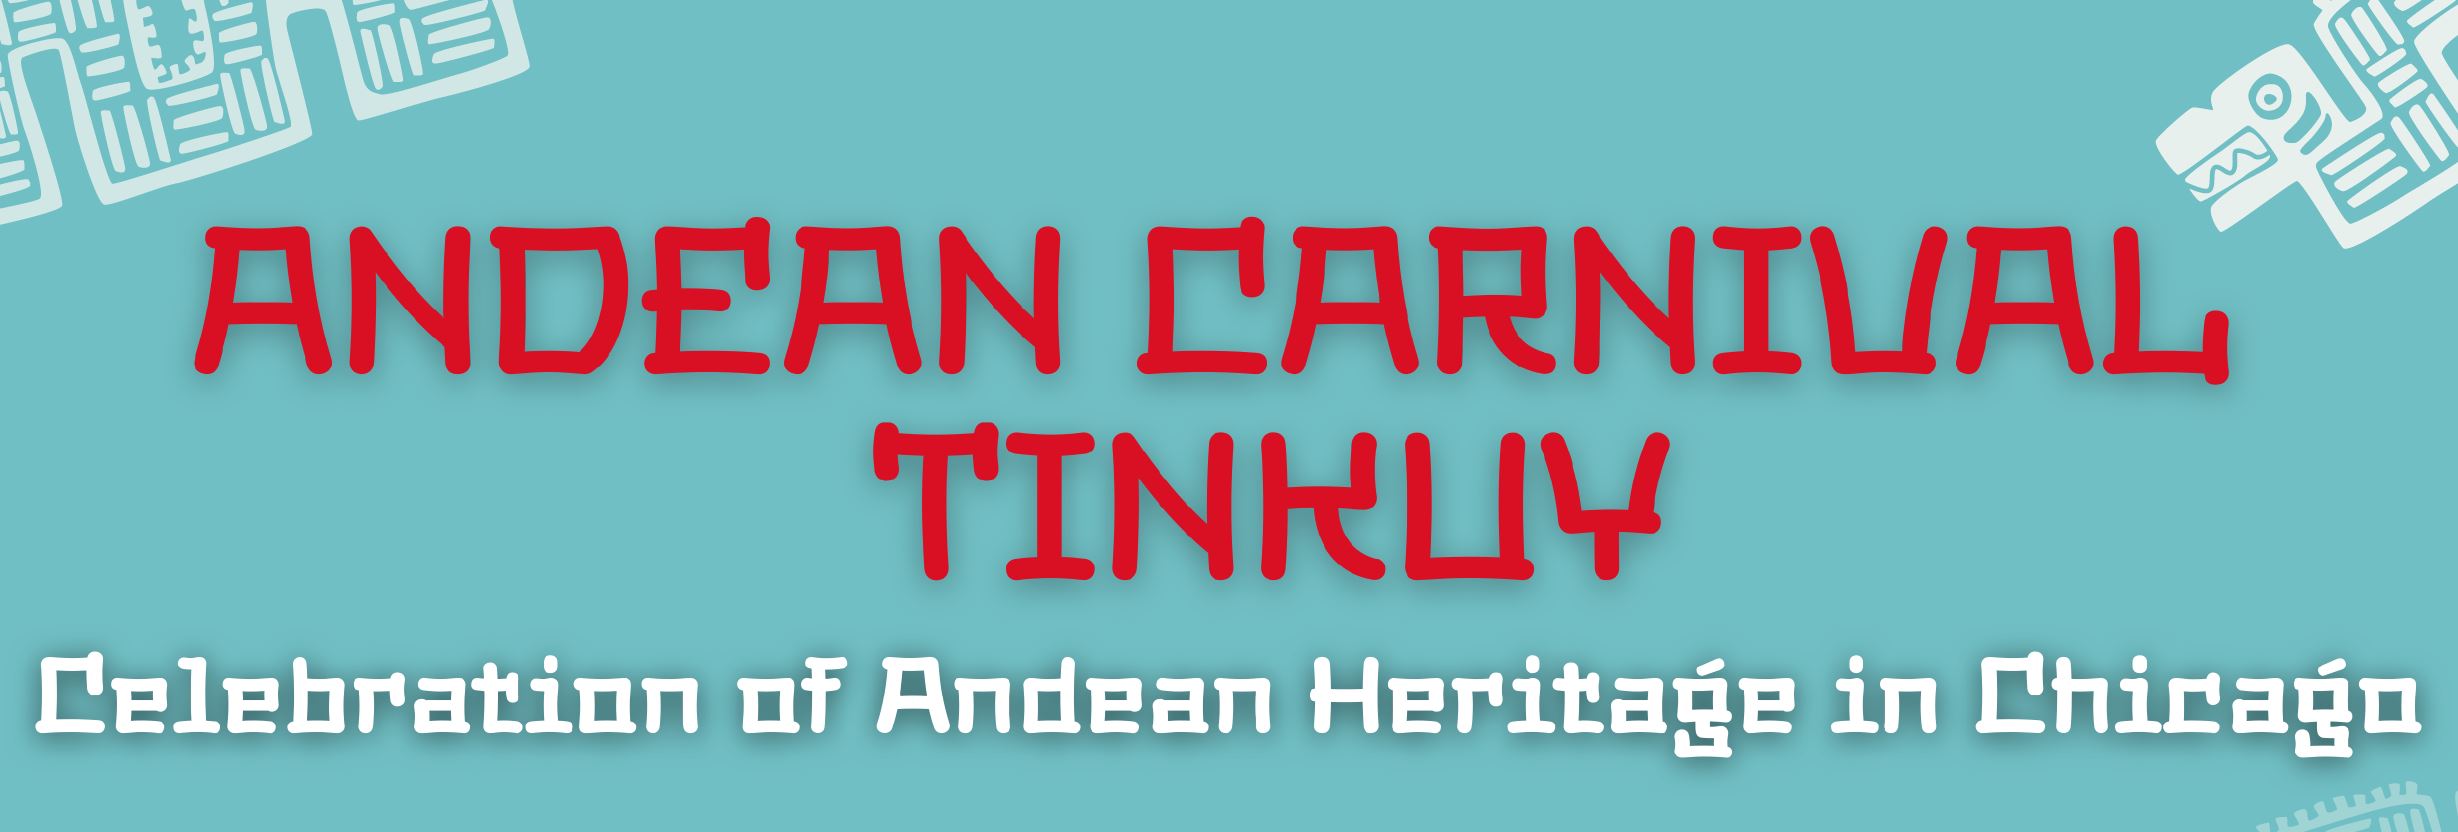 Andean Carnival Tinkuy - Celebration of Andean Heritage in Chicago